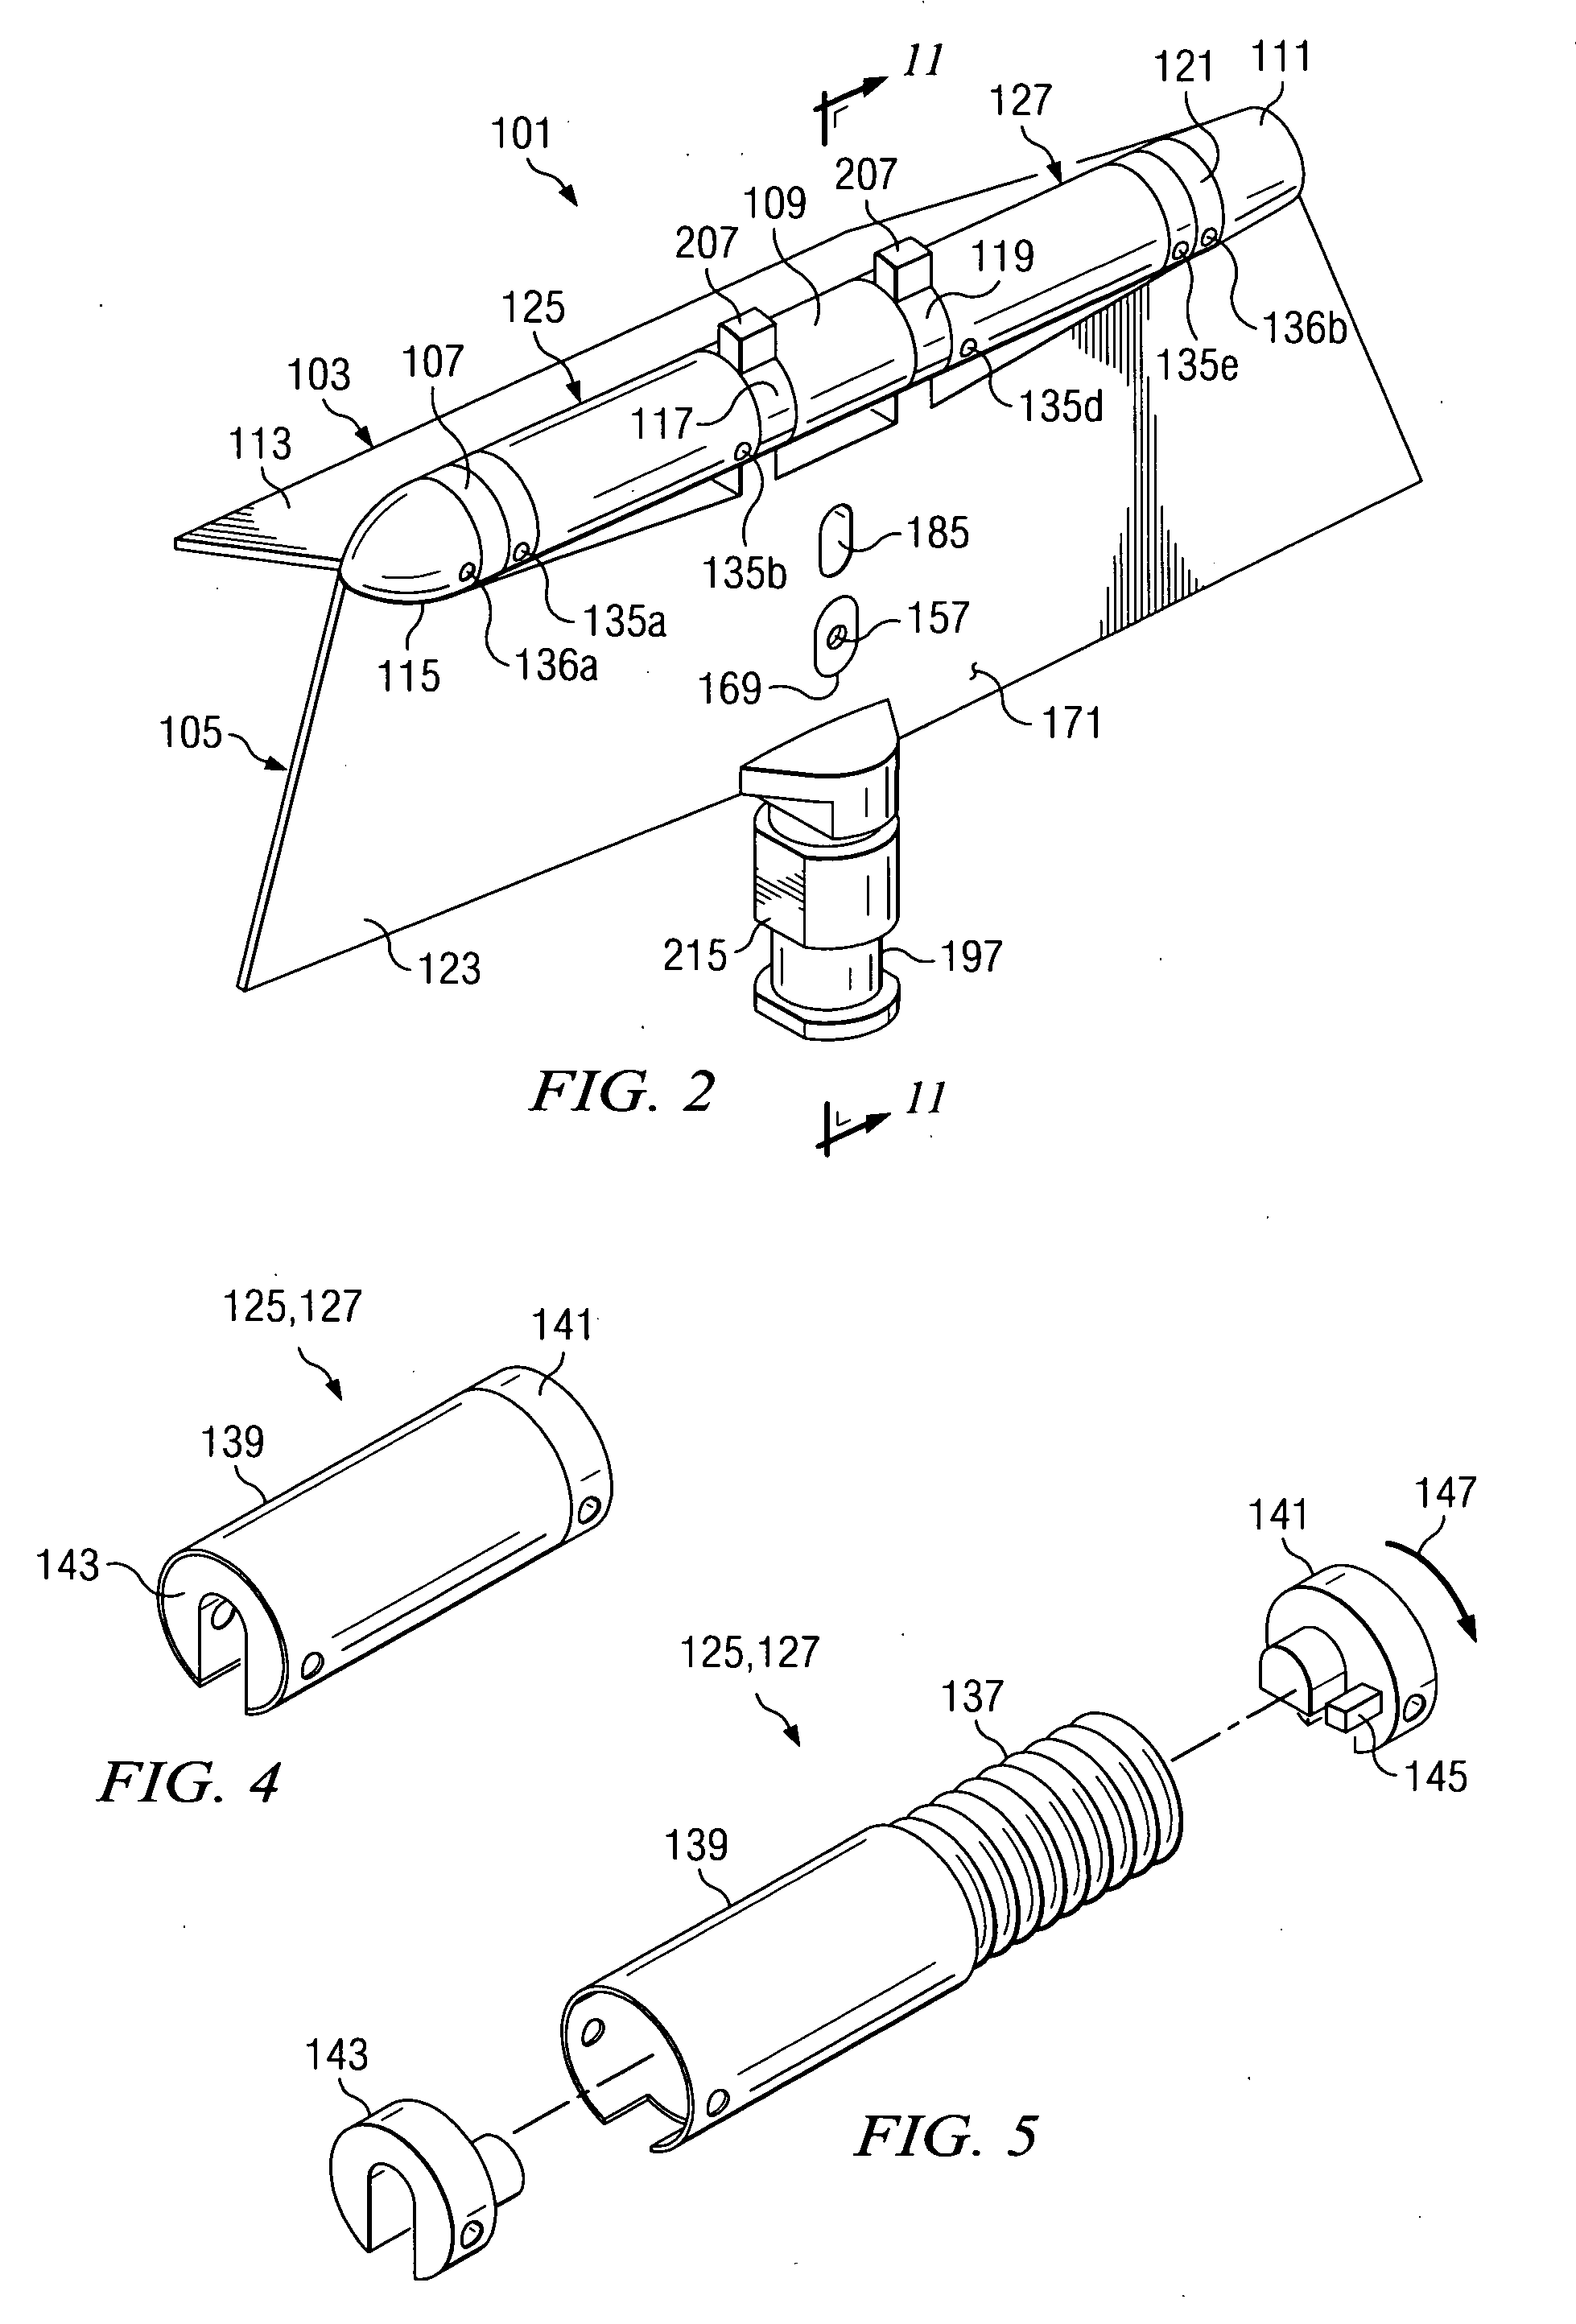 Foldable, lockable control surface and method of using same